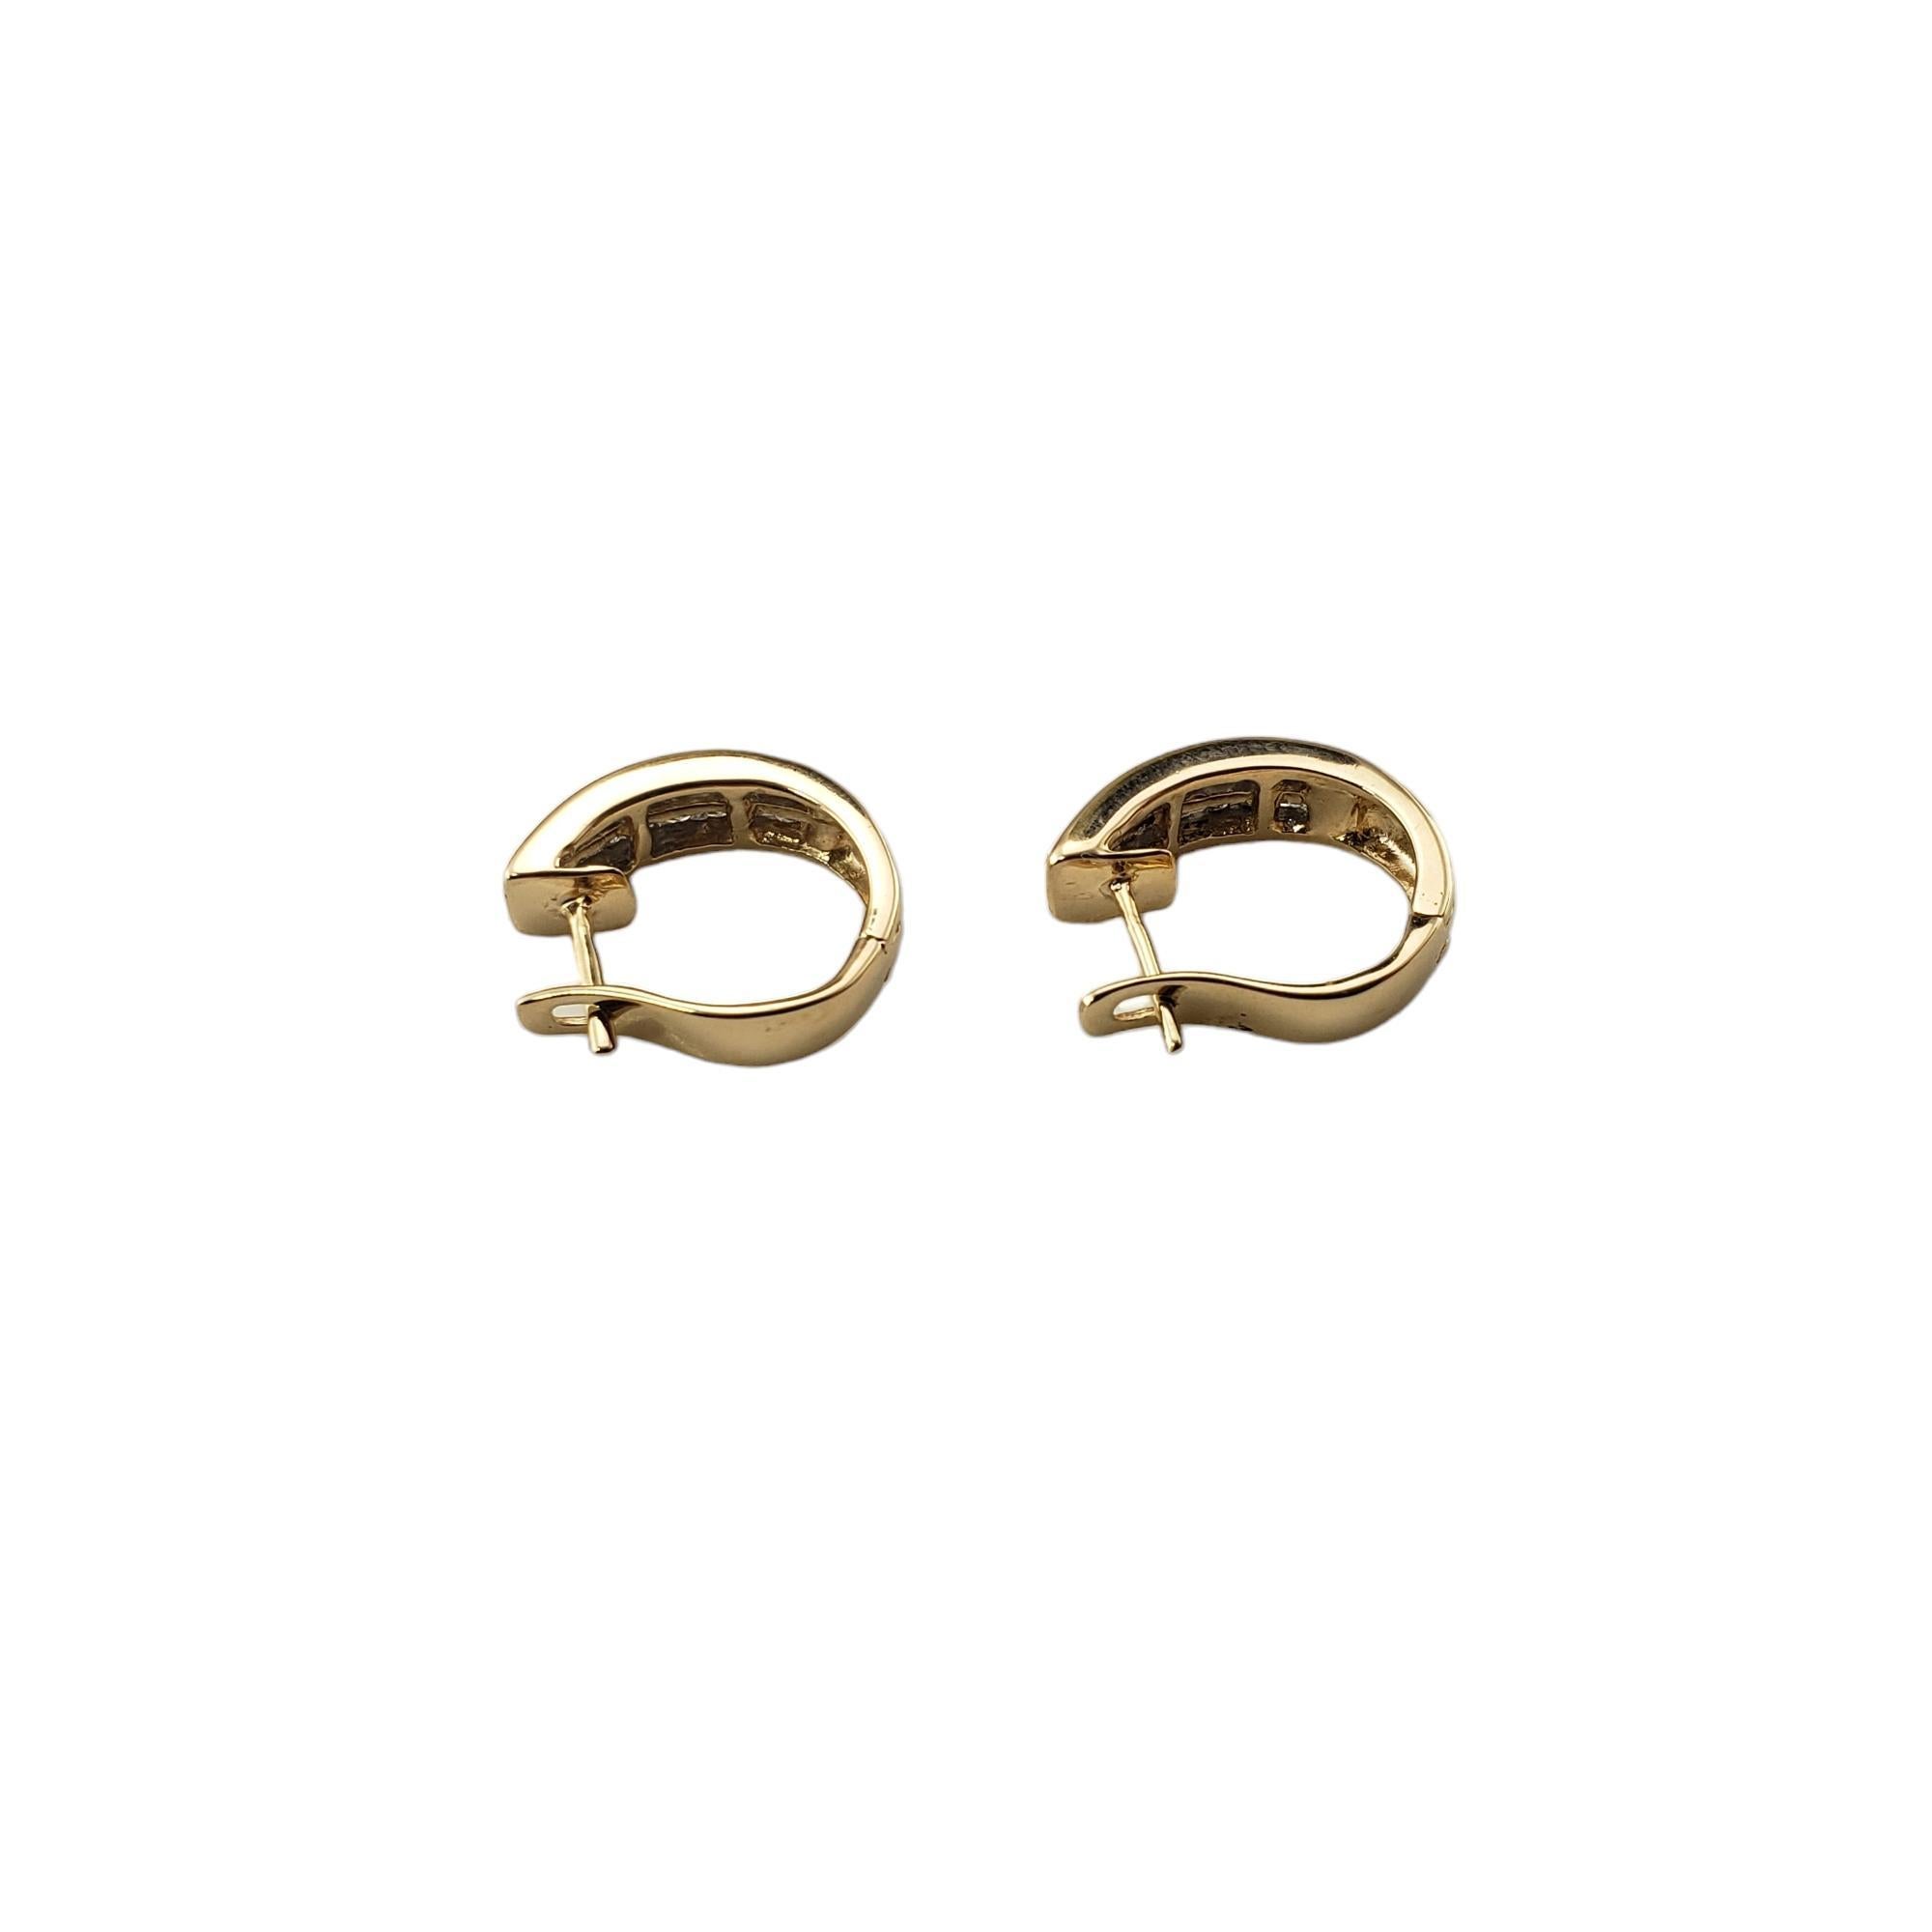  14 Karat Yellow Gold and Diamond Huggie Earrings #15577 In Good Condition For Sale In Washington Depot, CT